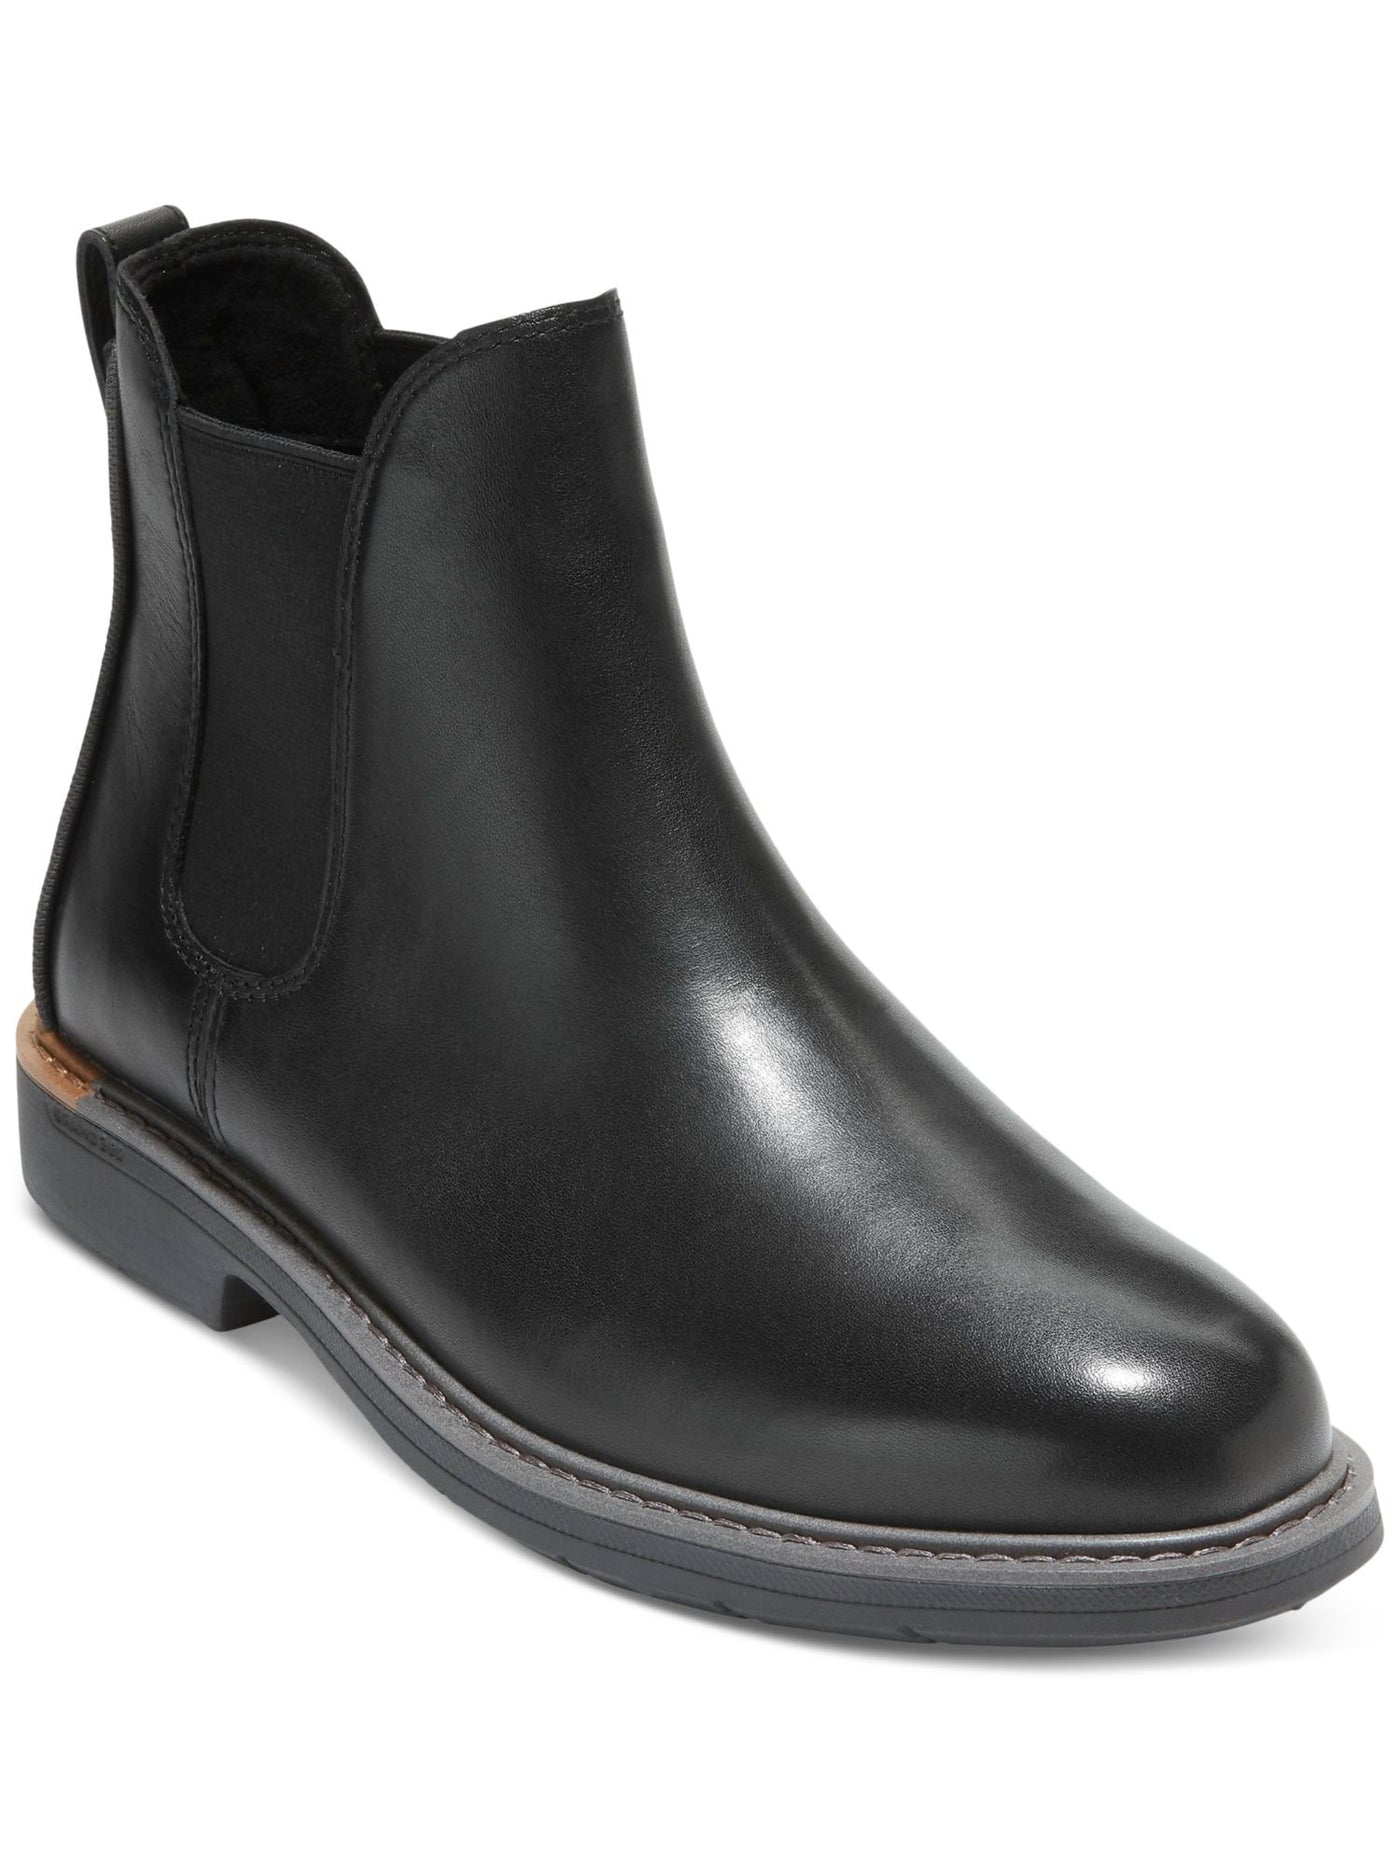 COLE HAAN GRANDSERIES Mens Black Pull Tab Goring Cushioned Go-to Round Toe Block Heel Leather Chelsea 7 M